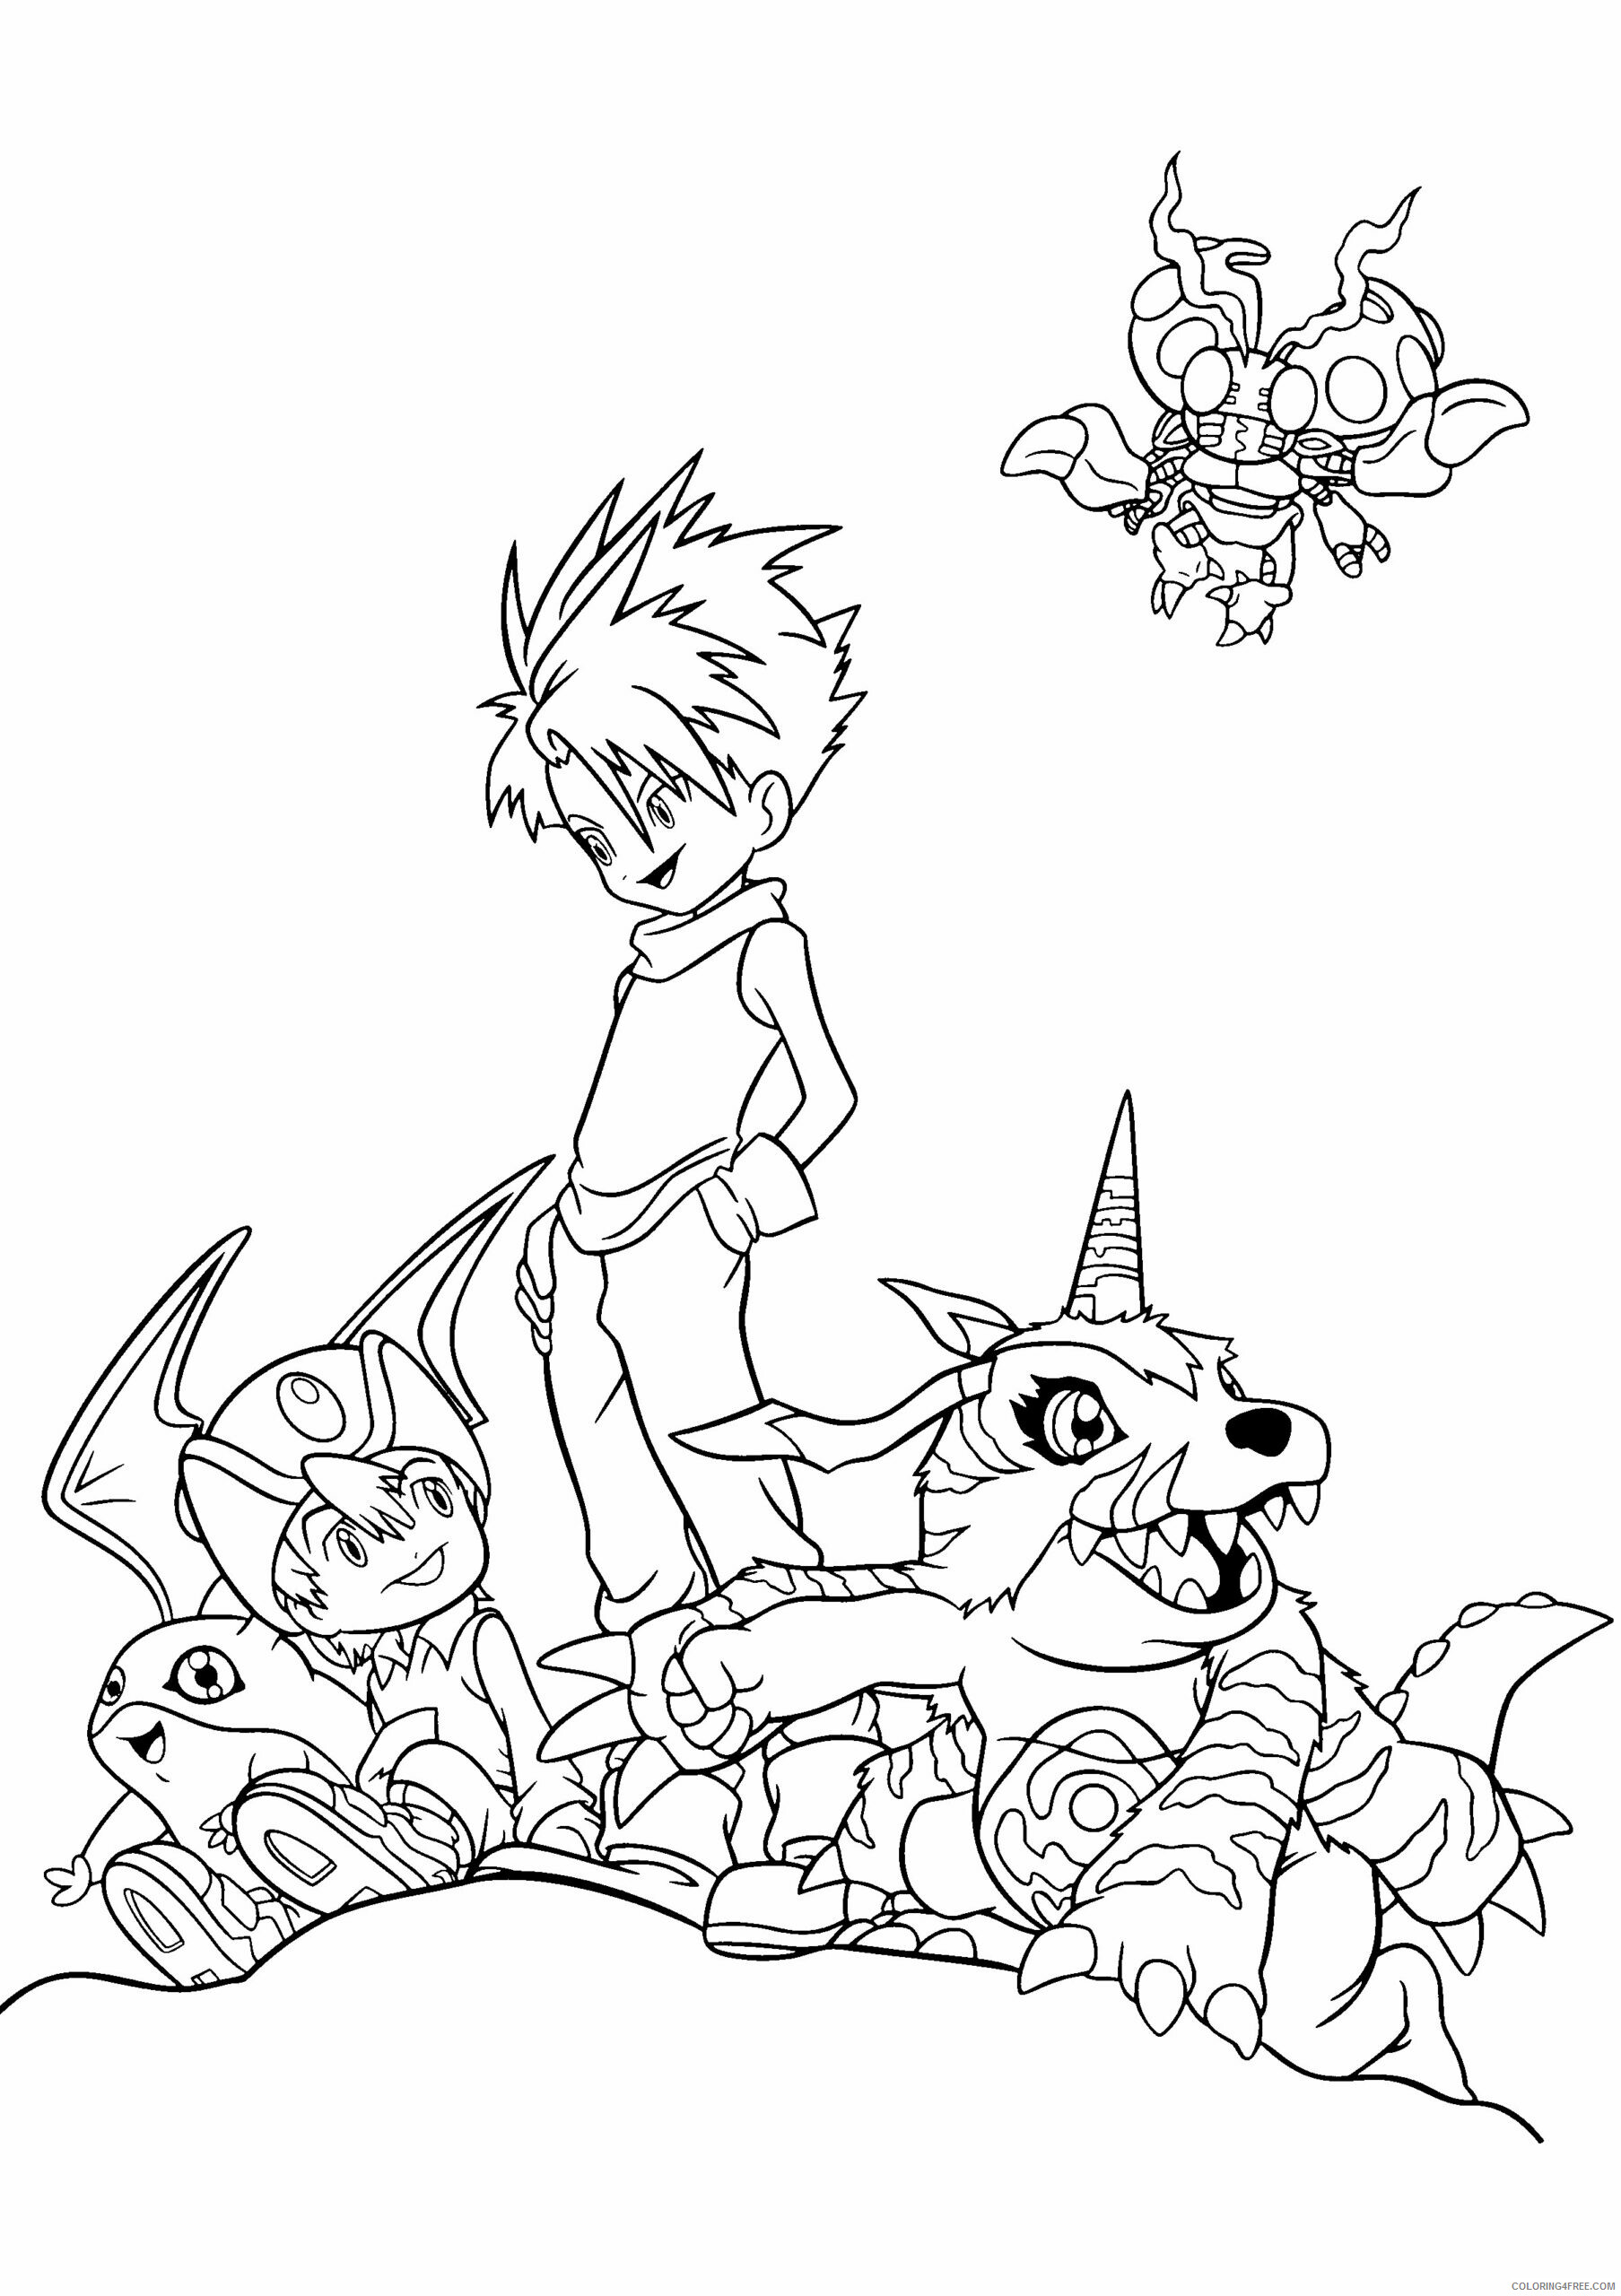 Digimon Printable Coloring Pages Anime digimon 116 2021 0223 Coloring4free